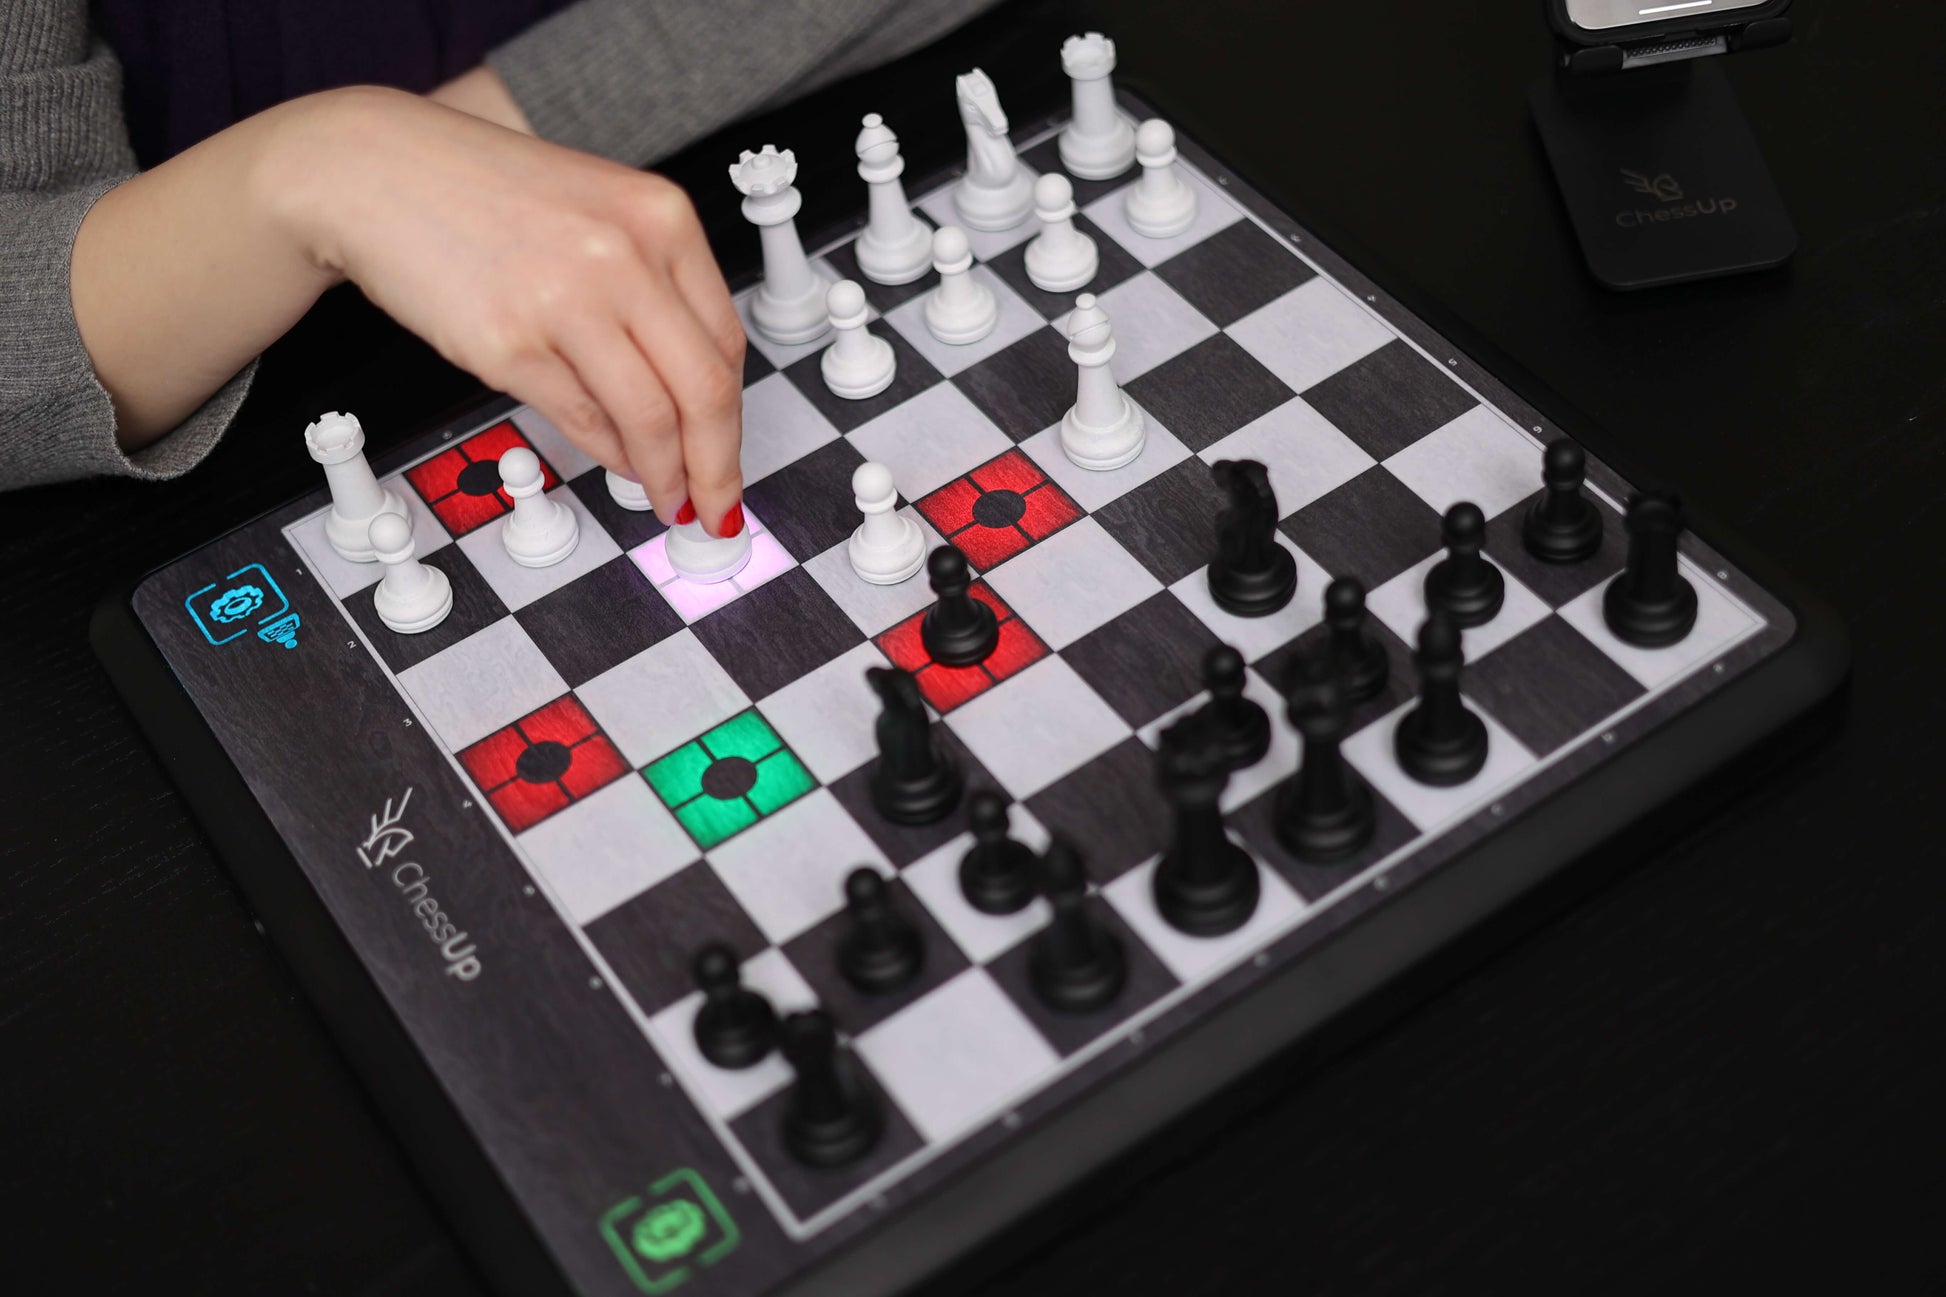 How to set up a game vs. AI on ChessUp 